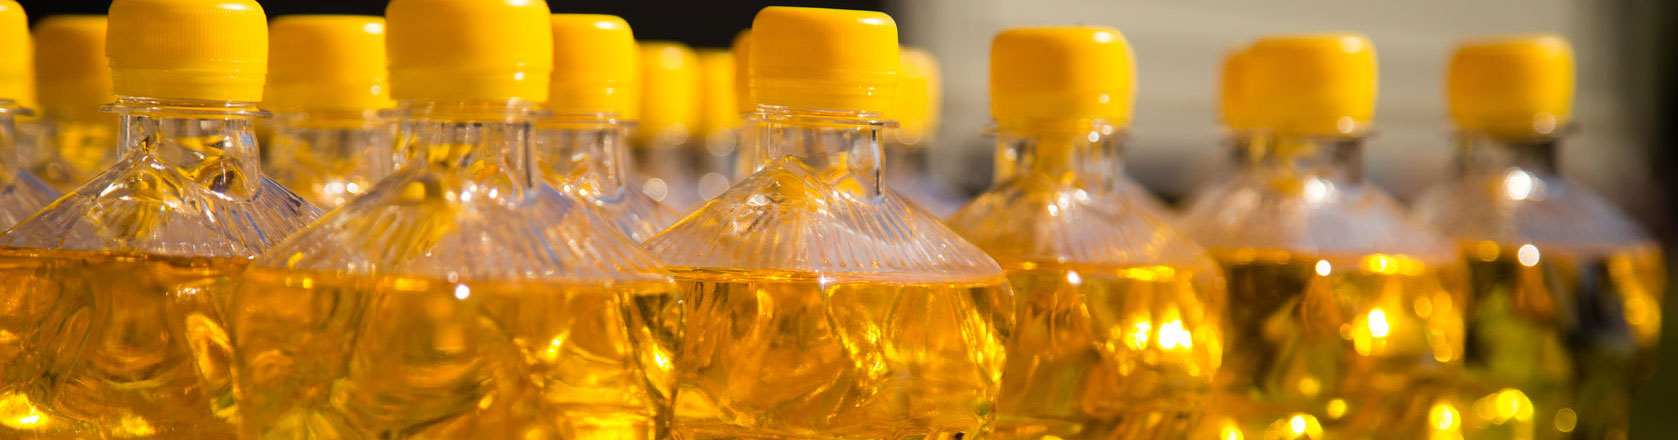 bottles of canola oil but is it healthy?